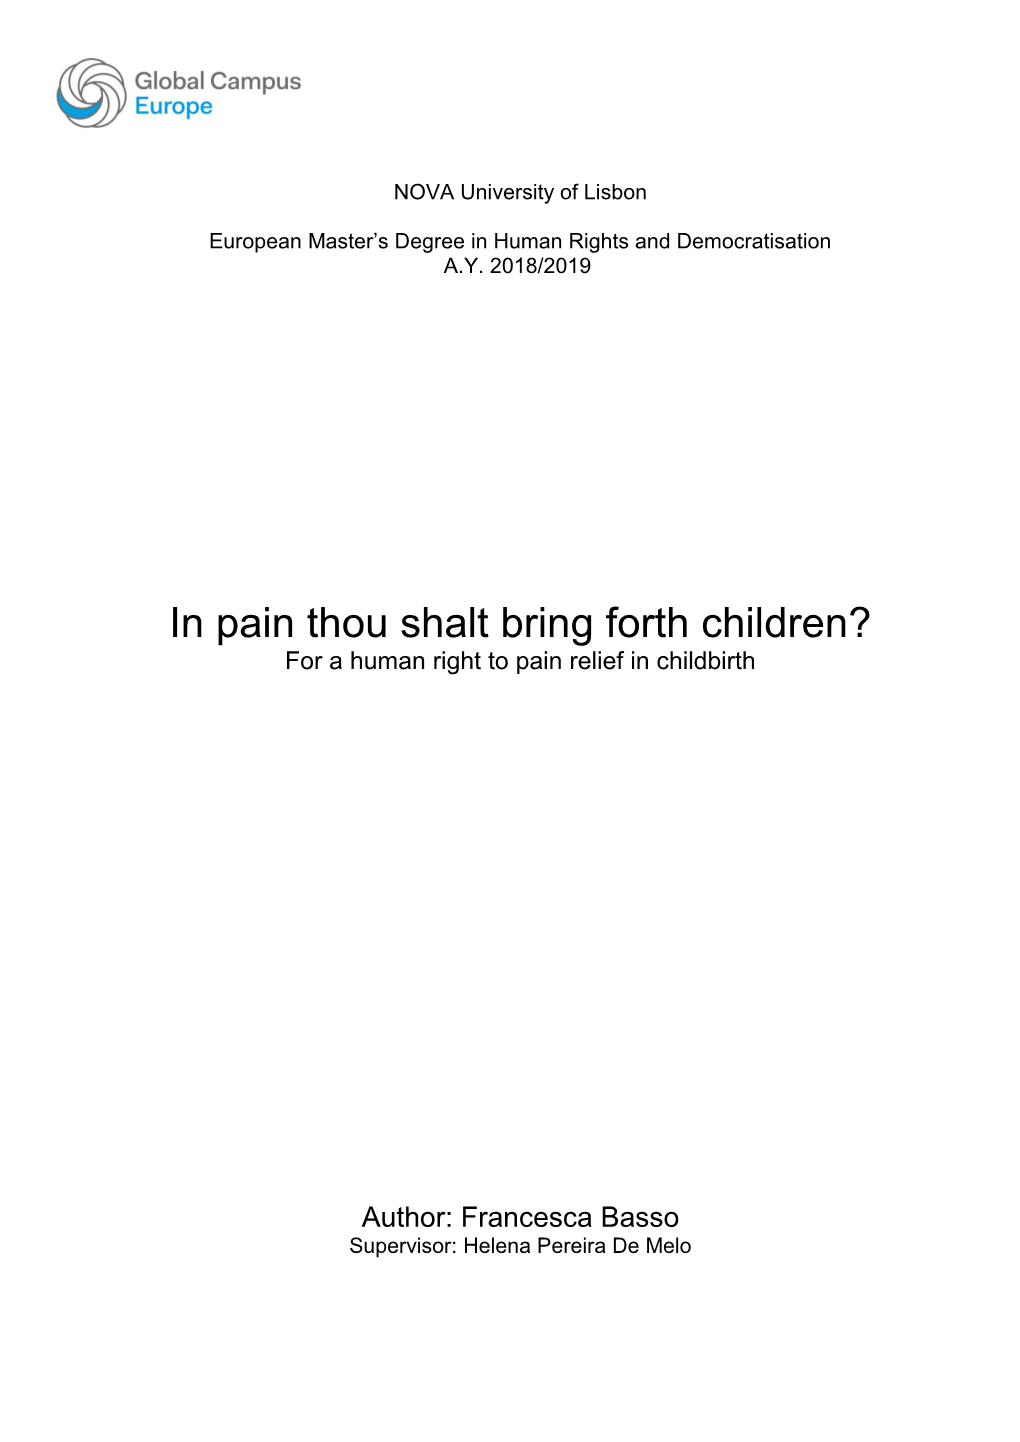 In Pain Thou Shalt Bring Forth Children? for a Human Right to Pain Relief in Childbirth